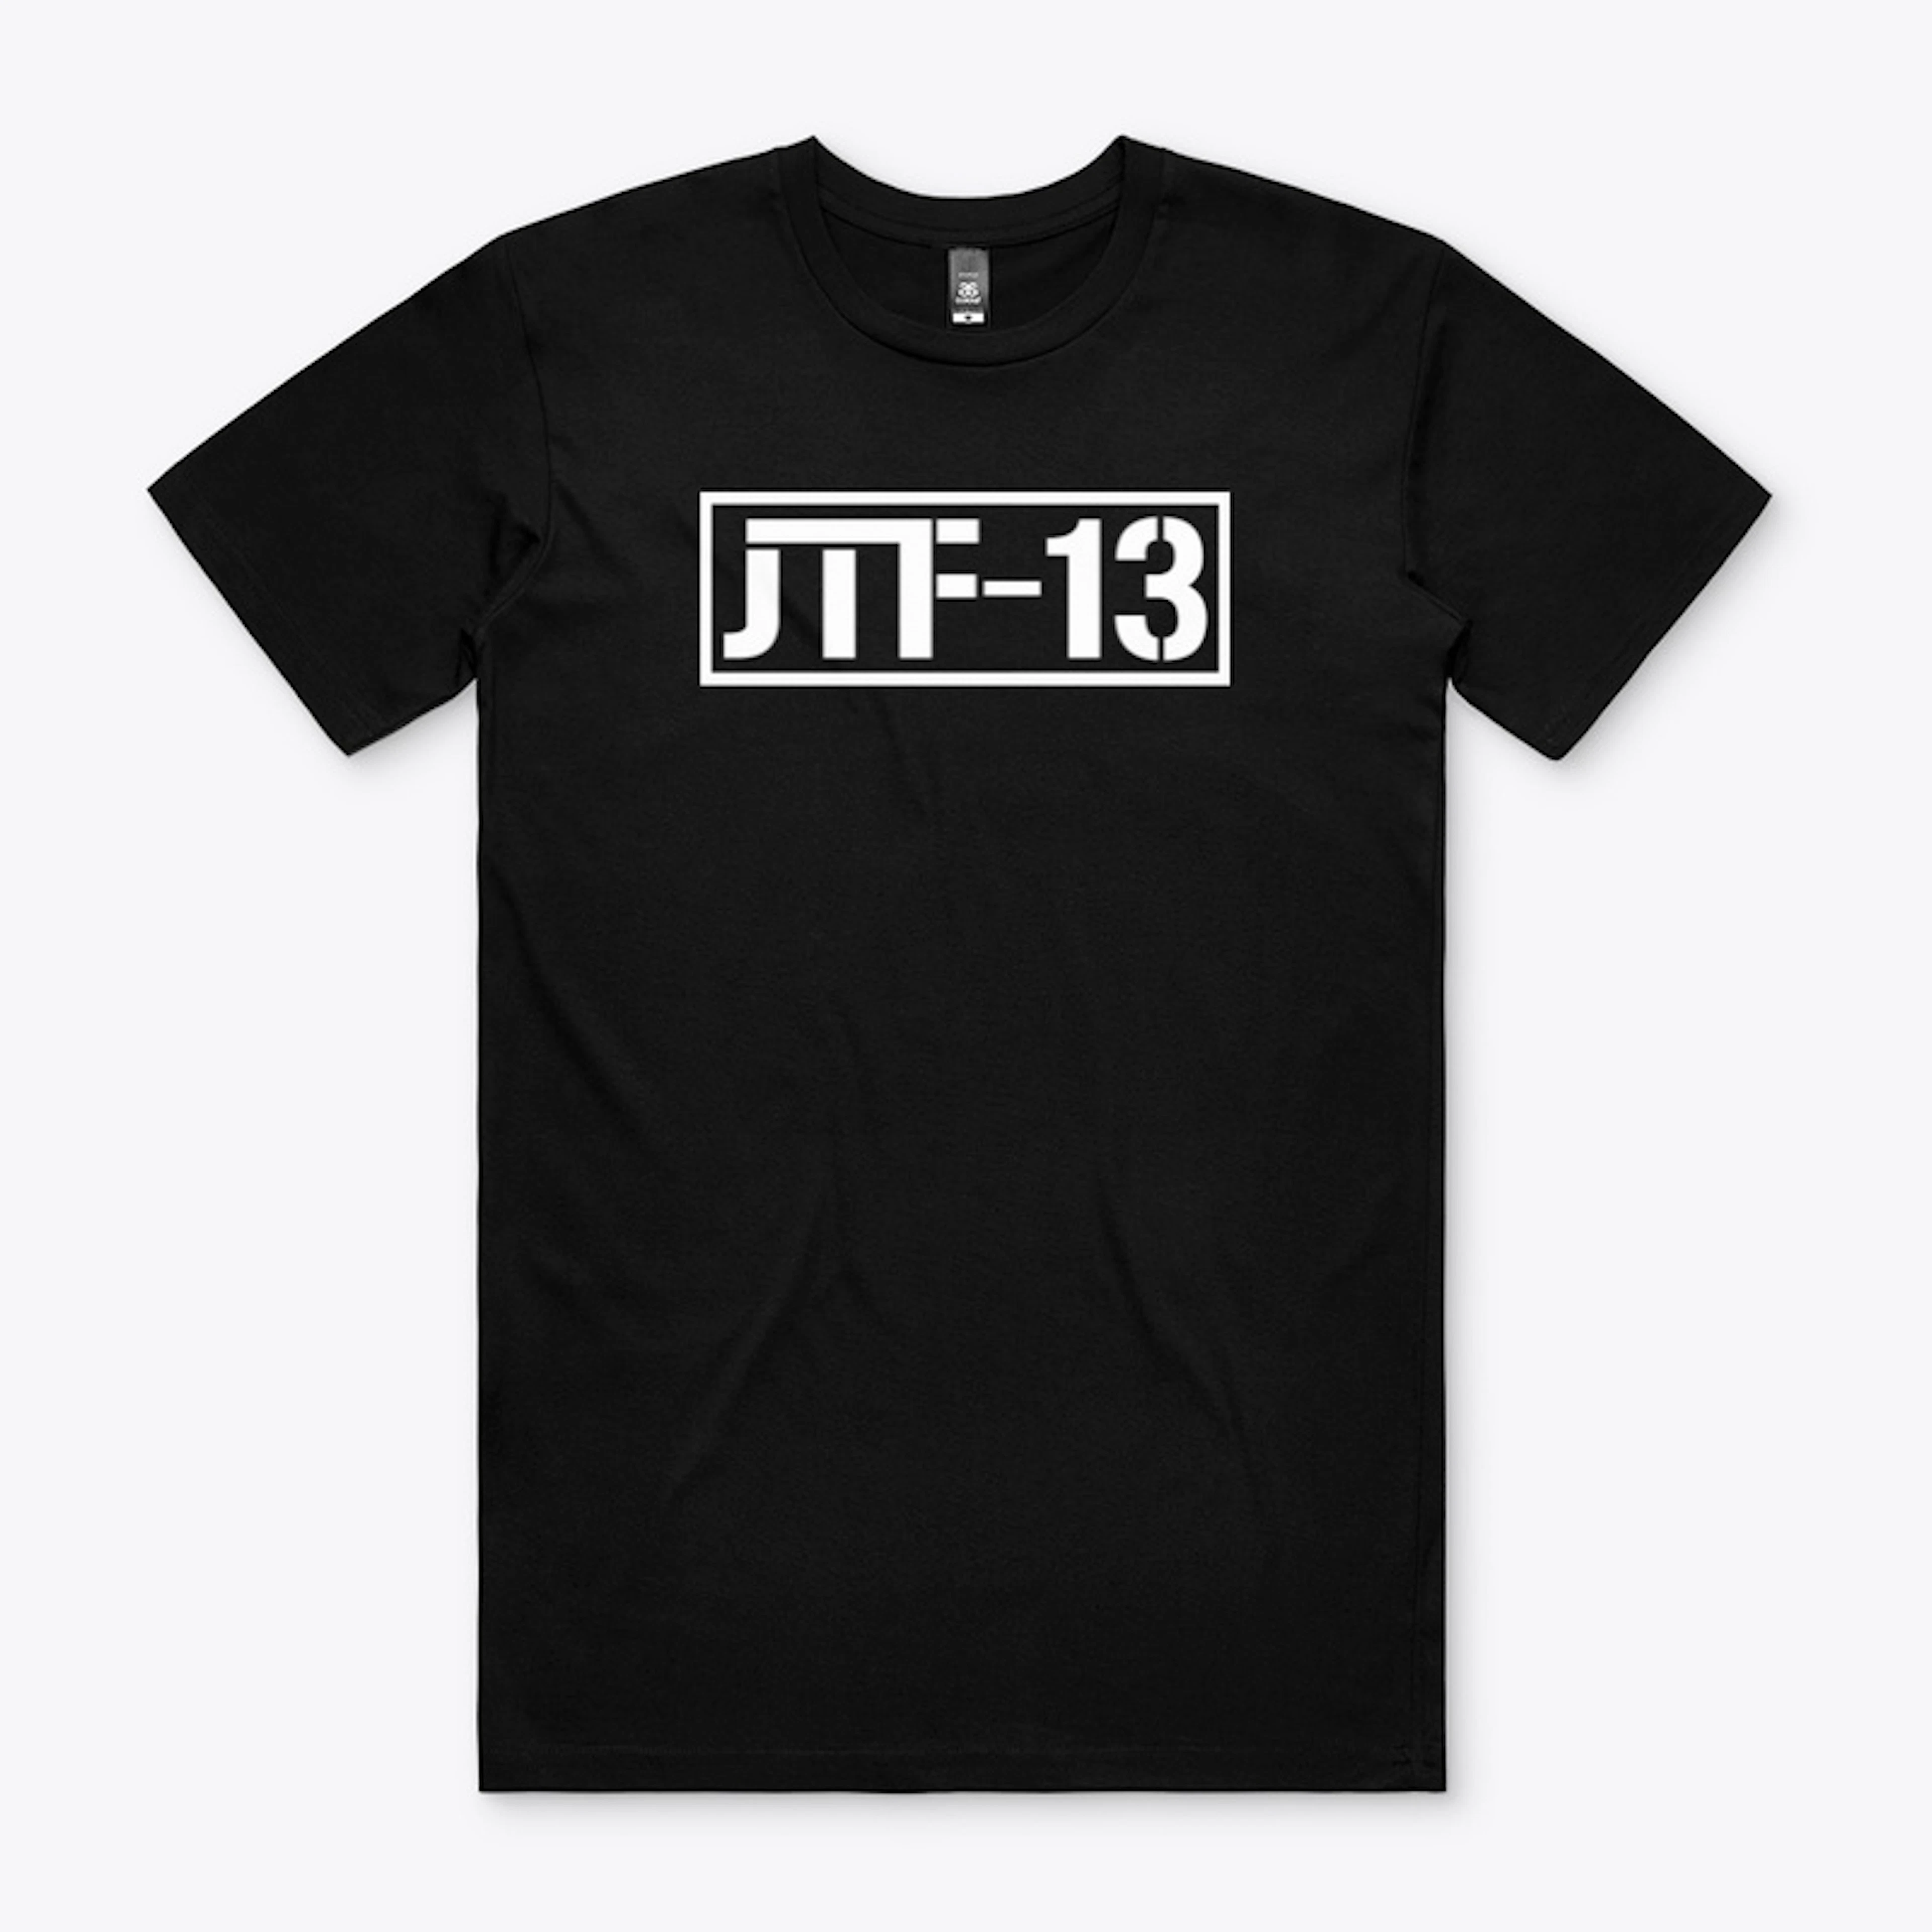 Black T-Shirt with JTF-13 brand